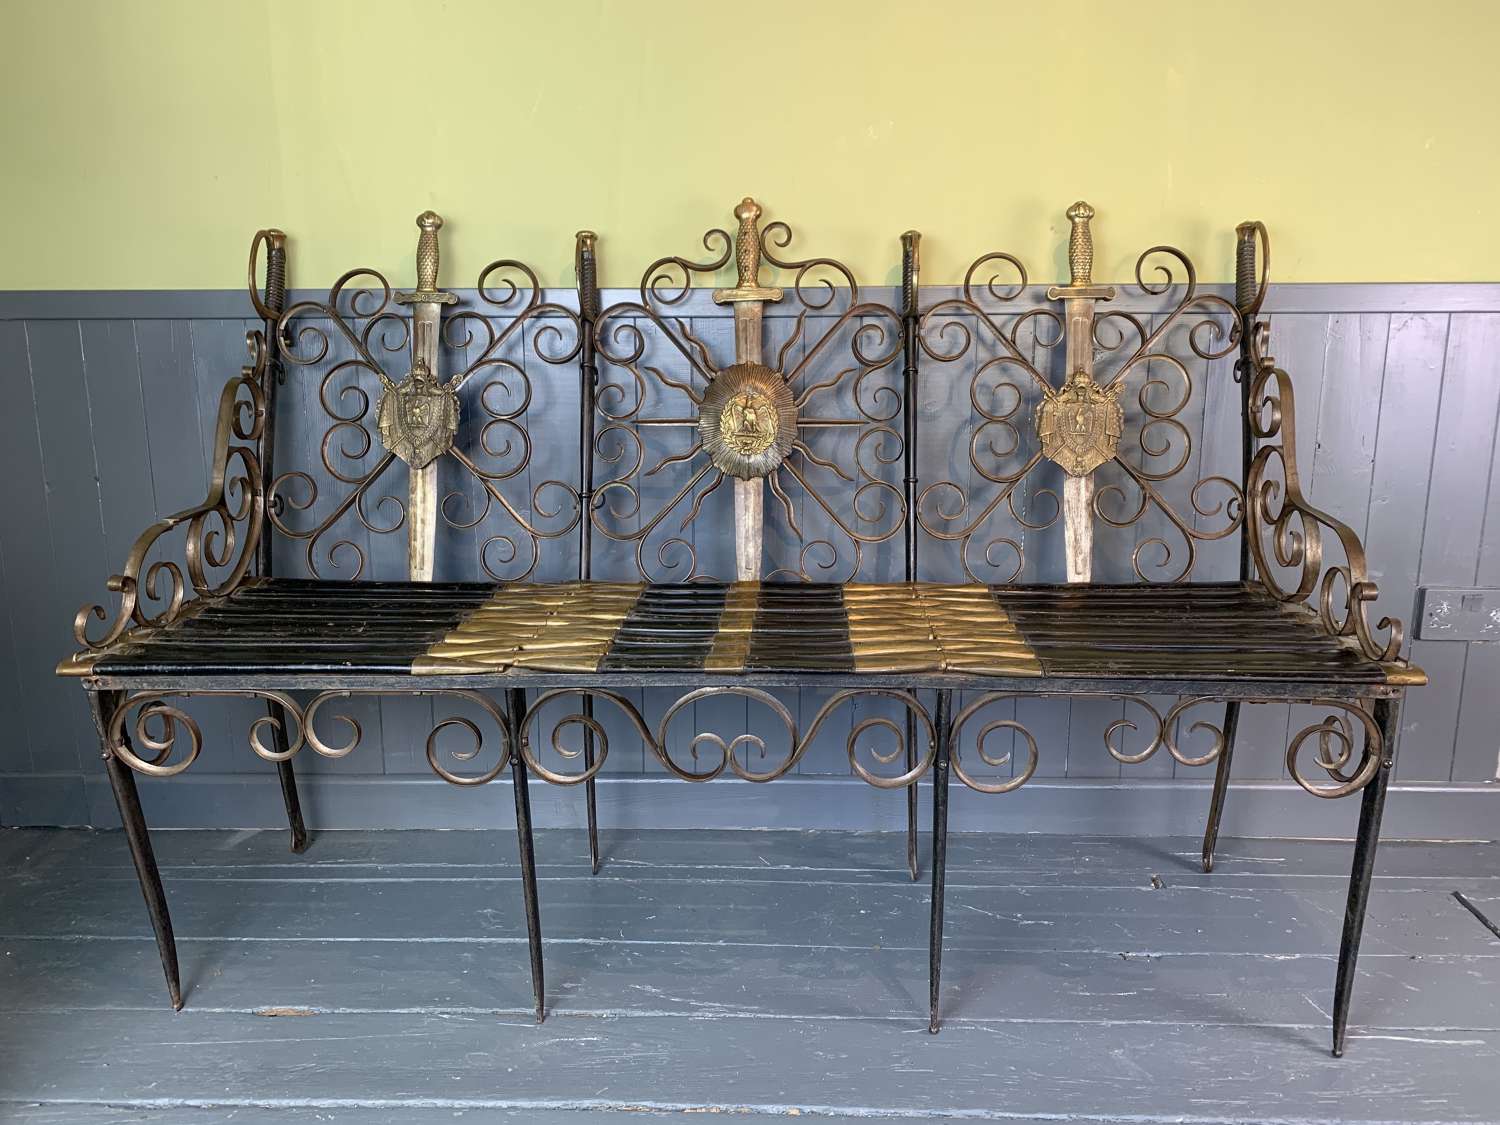 Bench Constructed from French Napoleonic Armoury